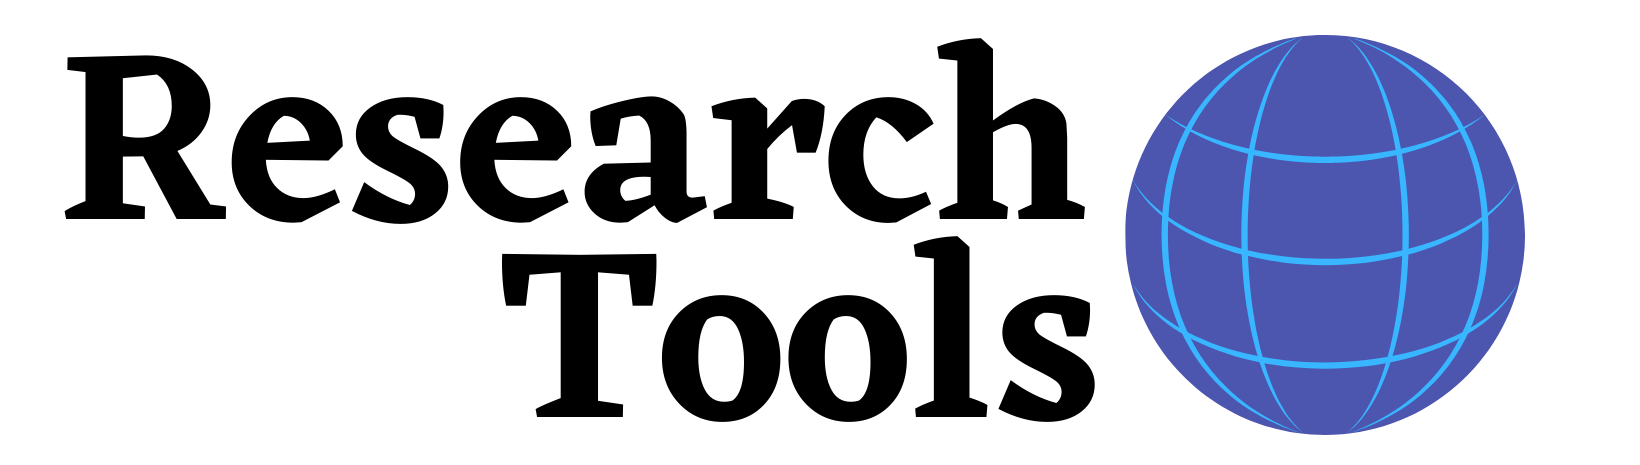 Research tools banner